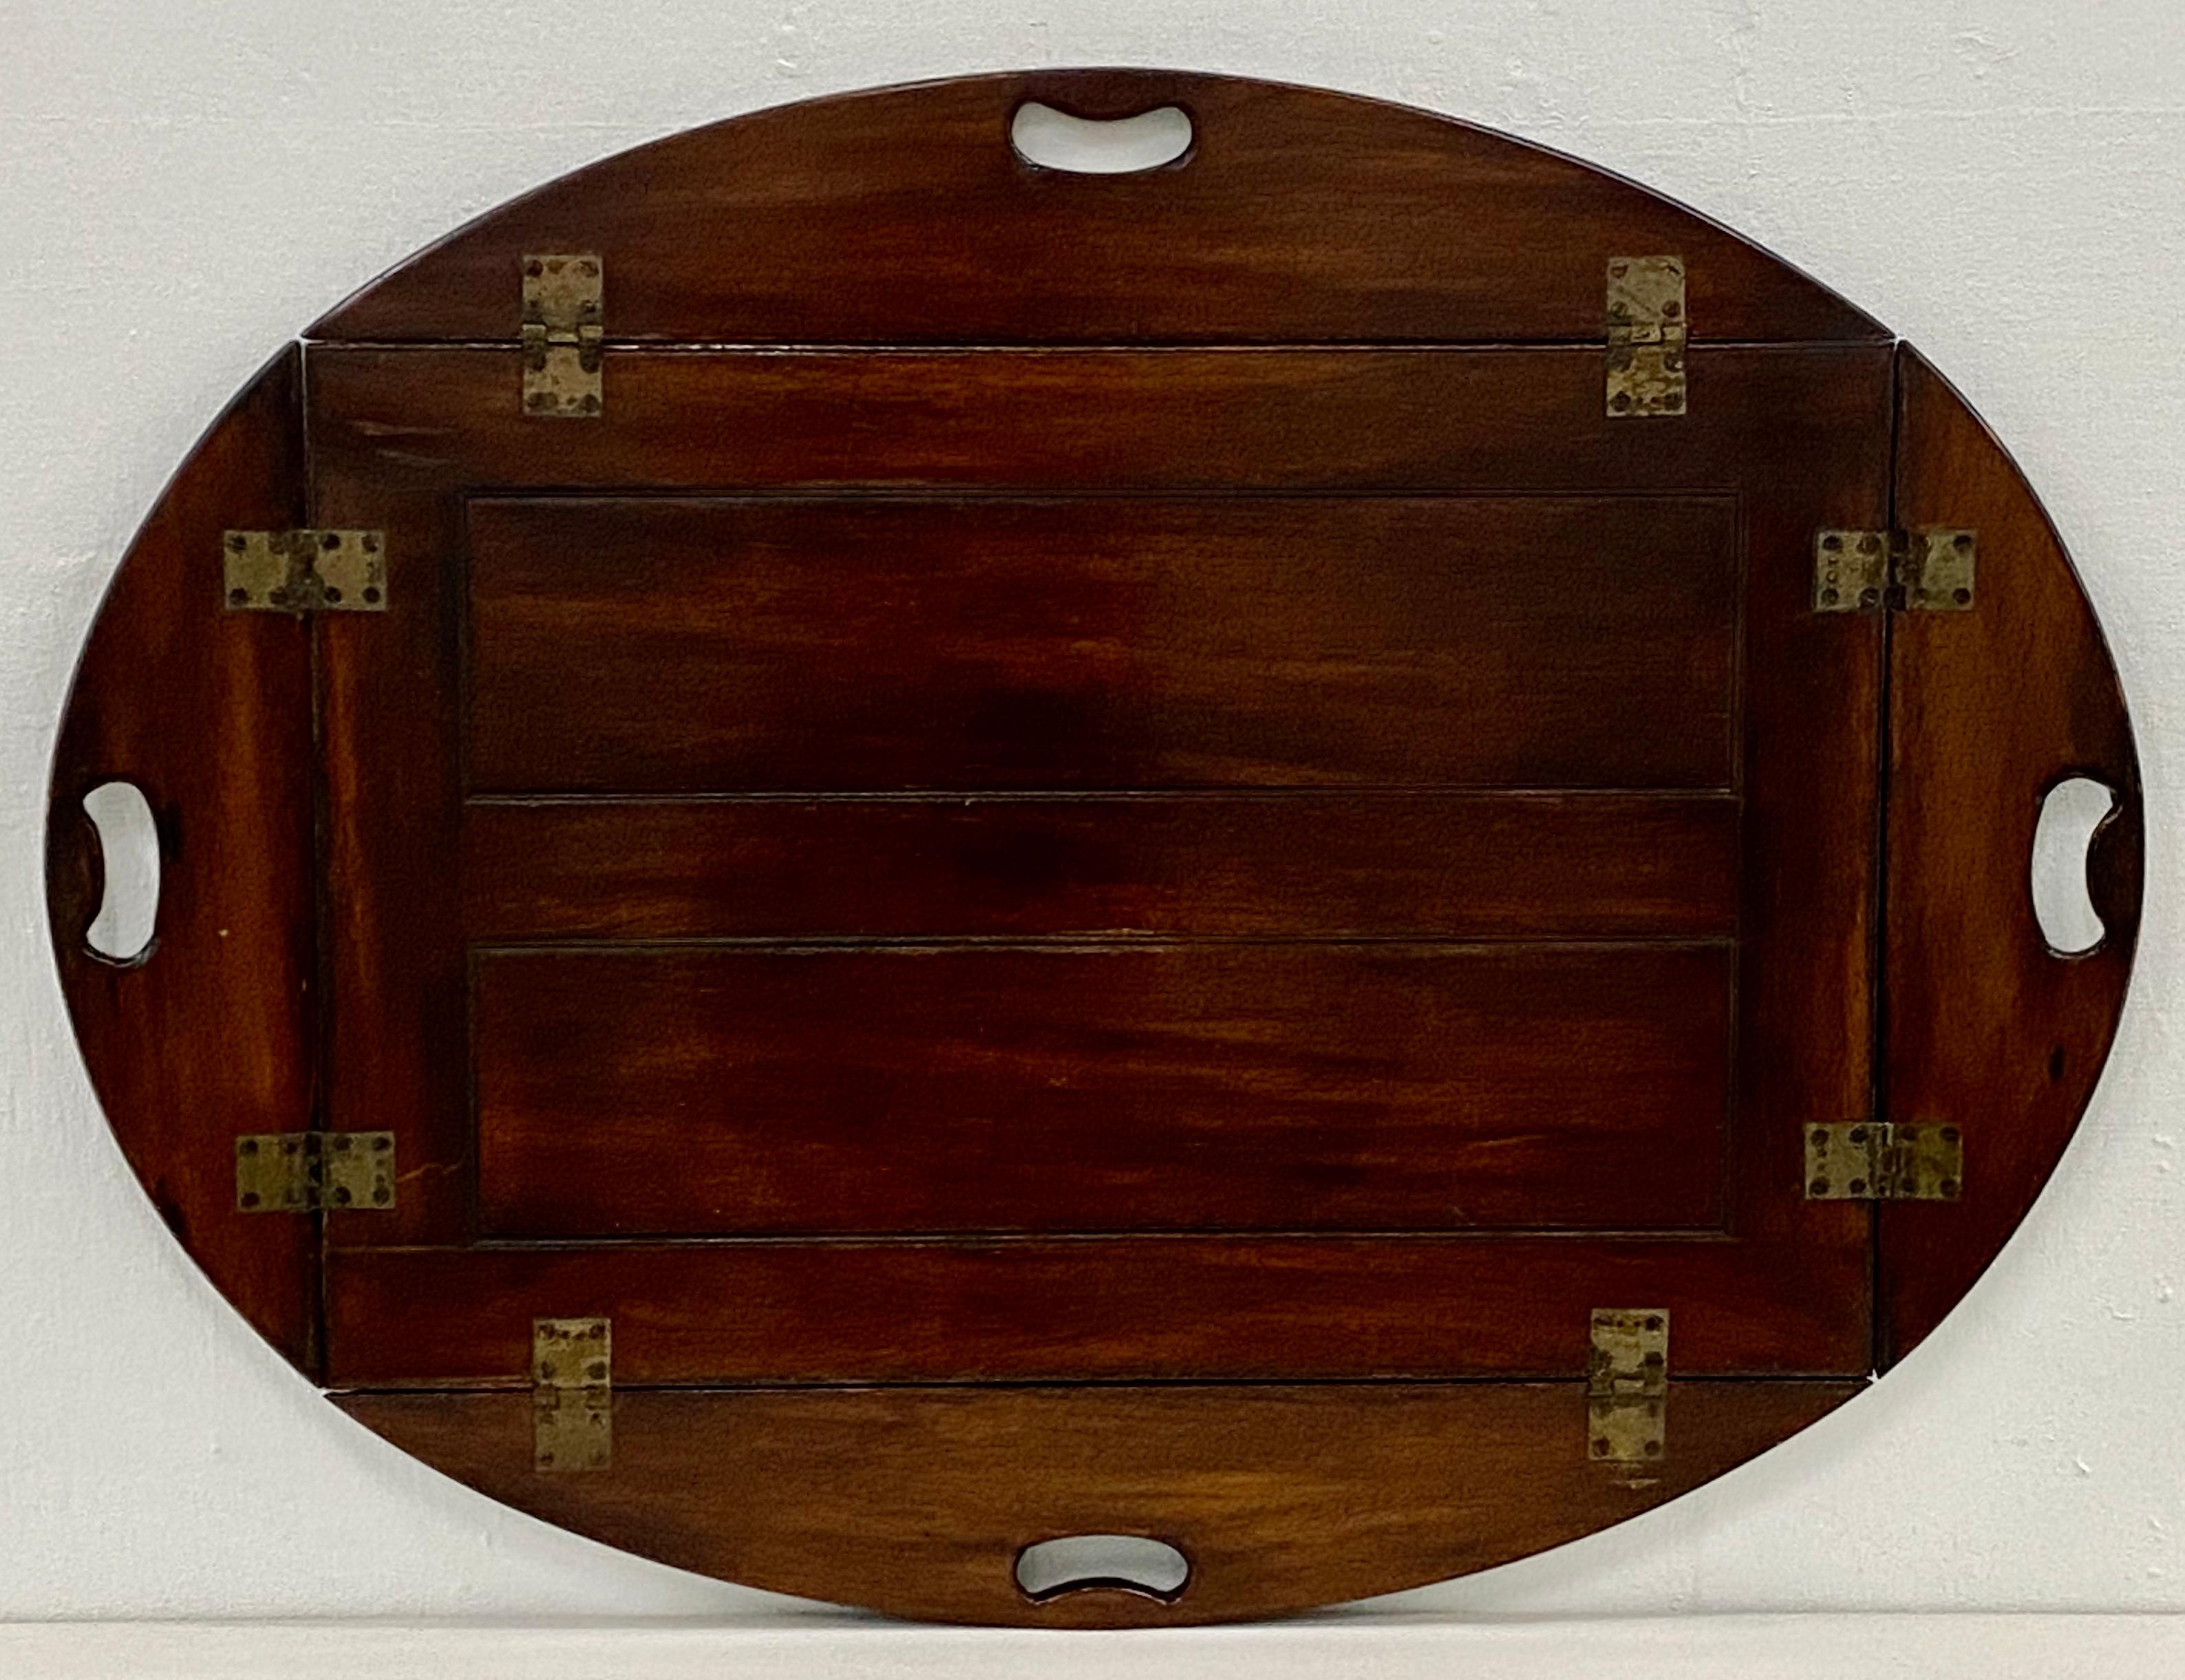 19th century mahogany serving tray

Hand made serving tray from solid mahogany with brass hardware.

The oval tray has four handles along four drop-down sides.

The tray sits atop a folding stand.

Dimensions 39.5